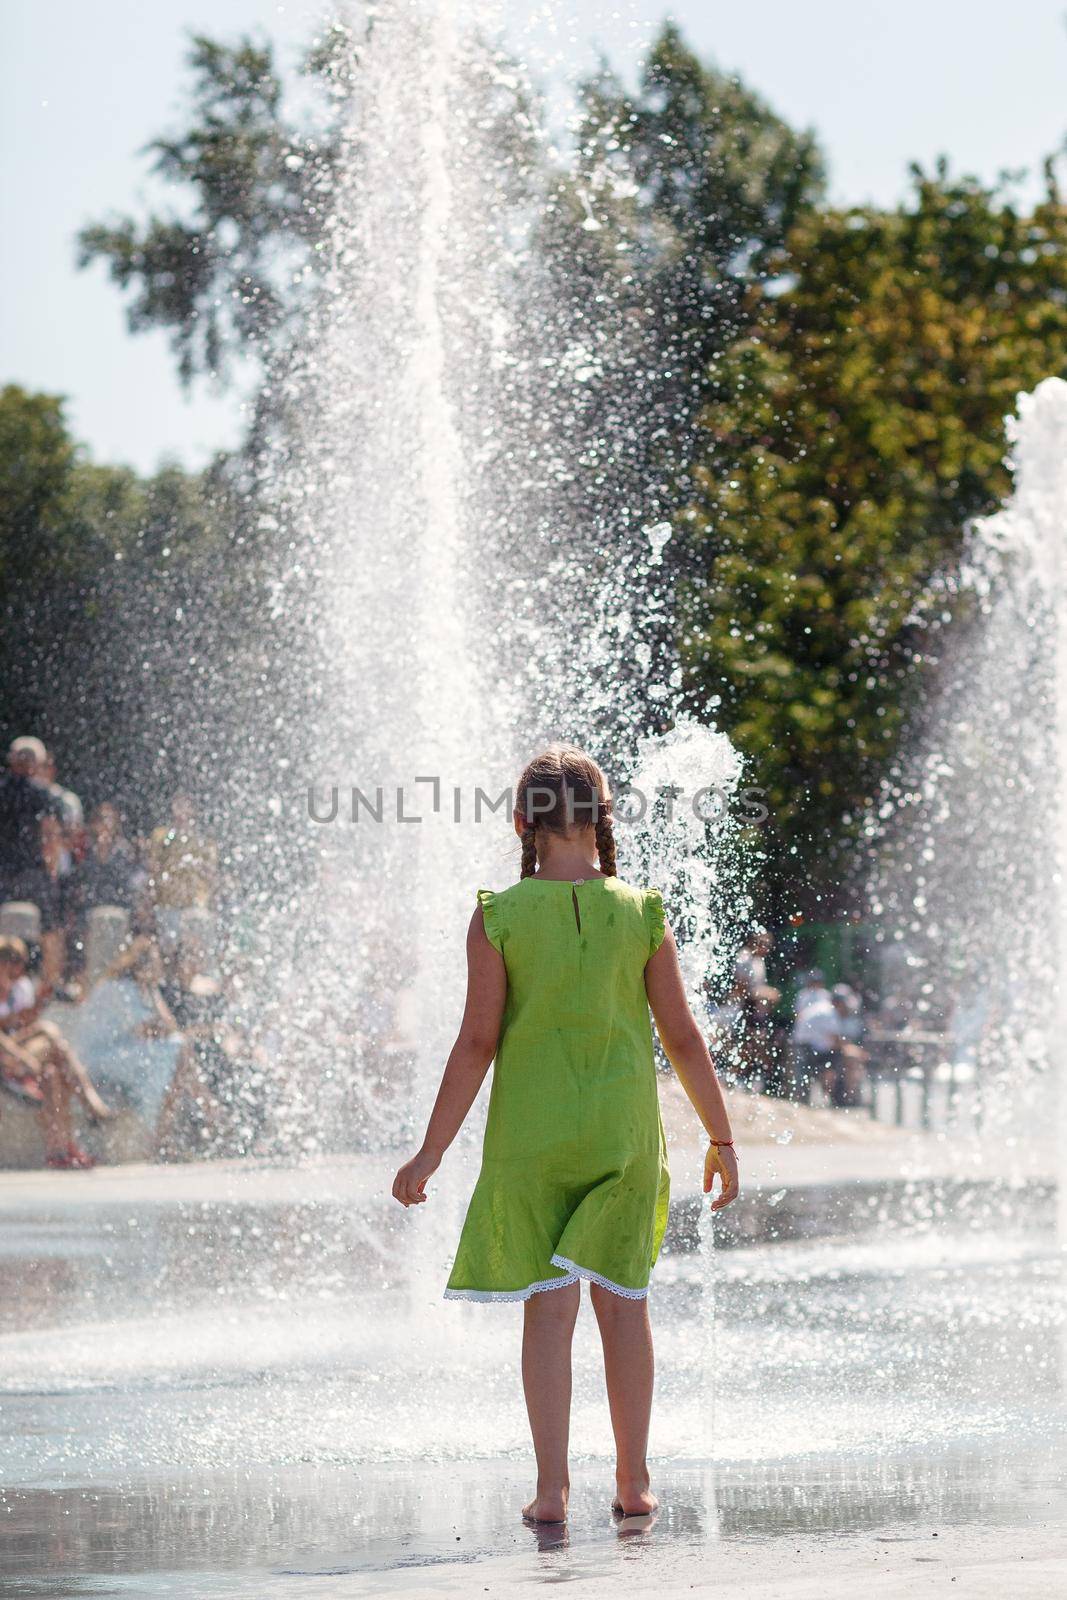 Barefoot girl in green dress in front of a fountain in the park. High water current, fun for children on a hot summer day.